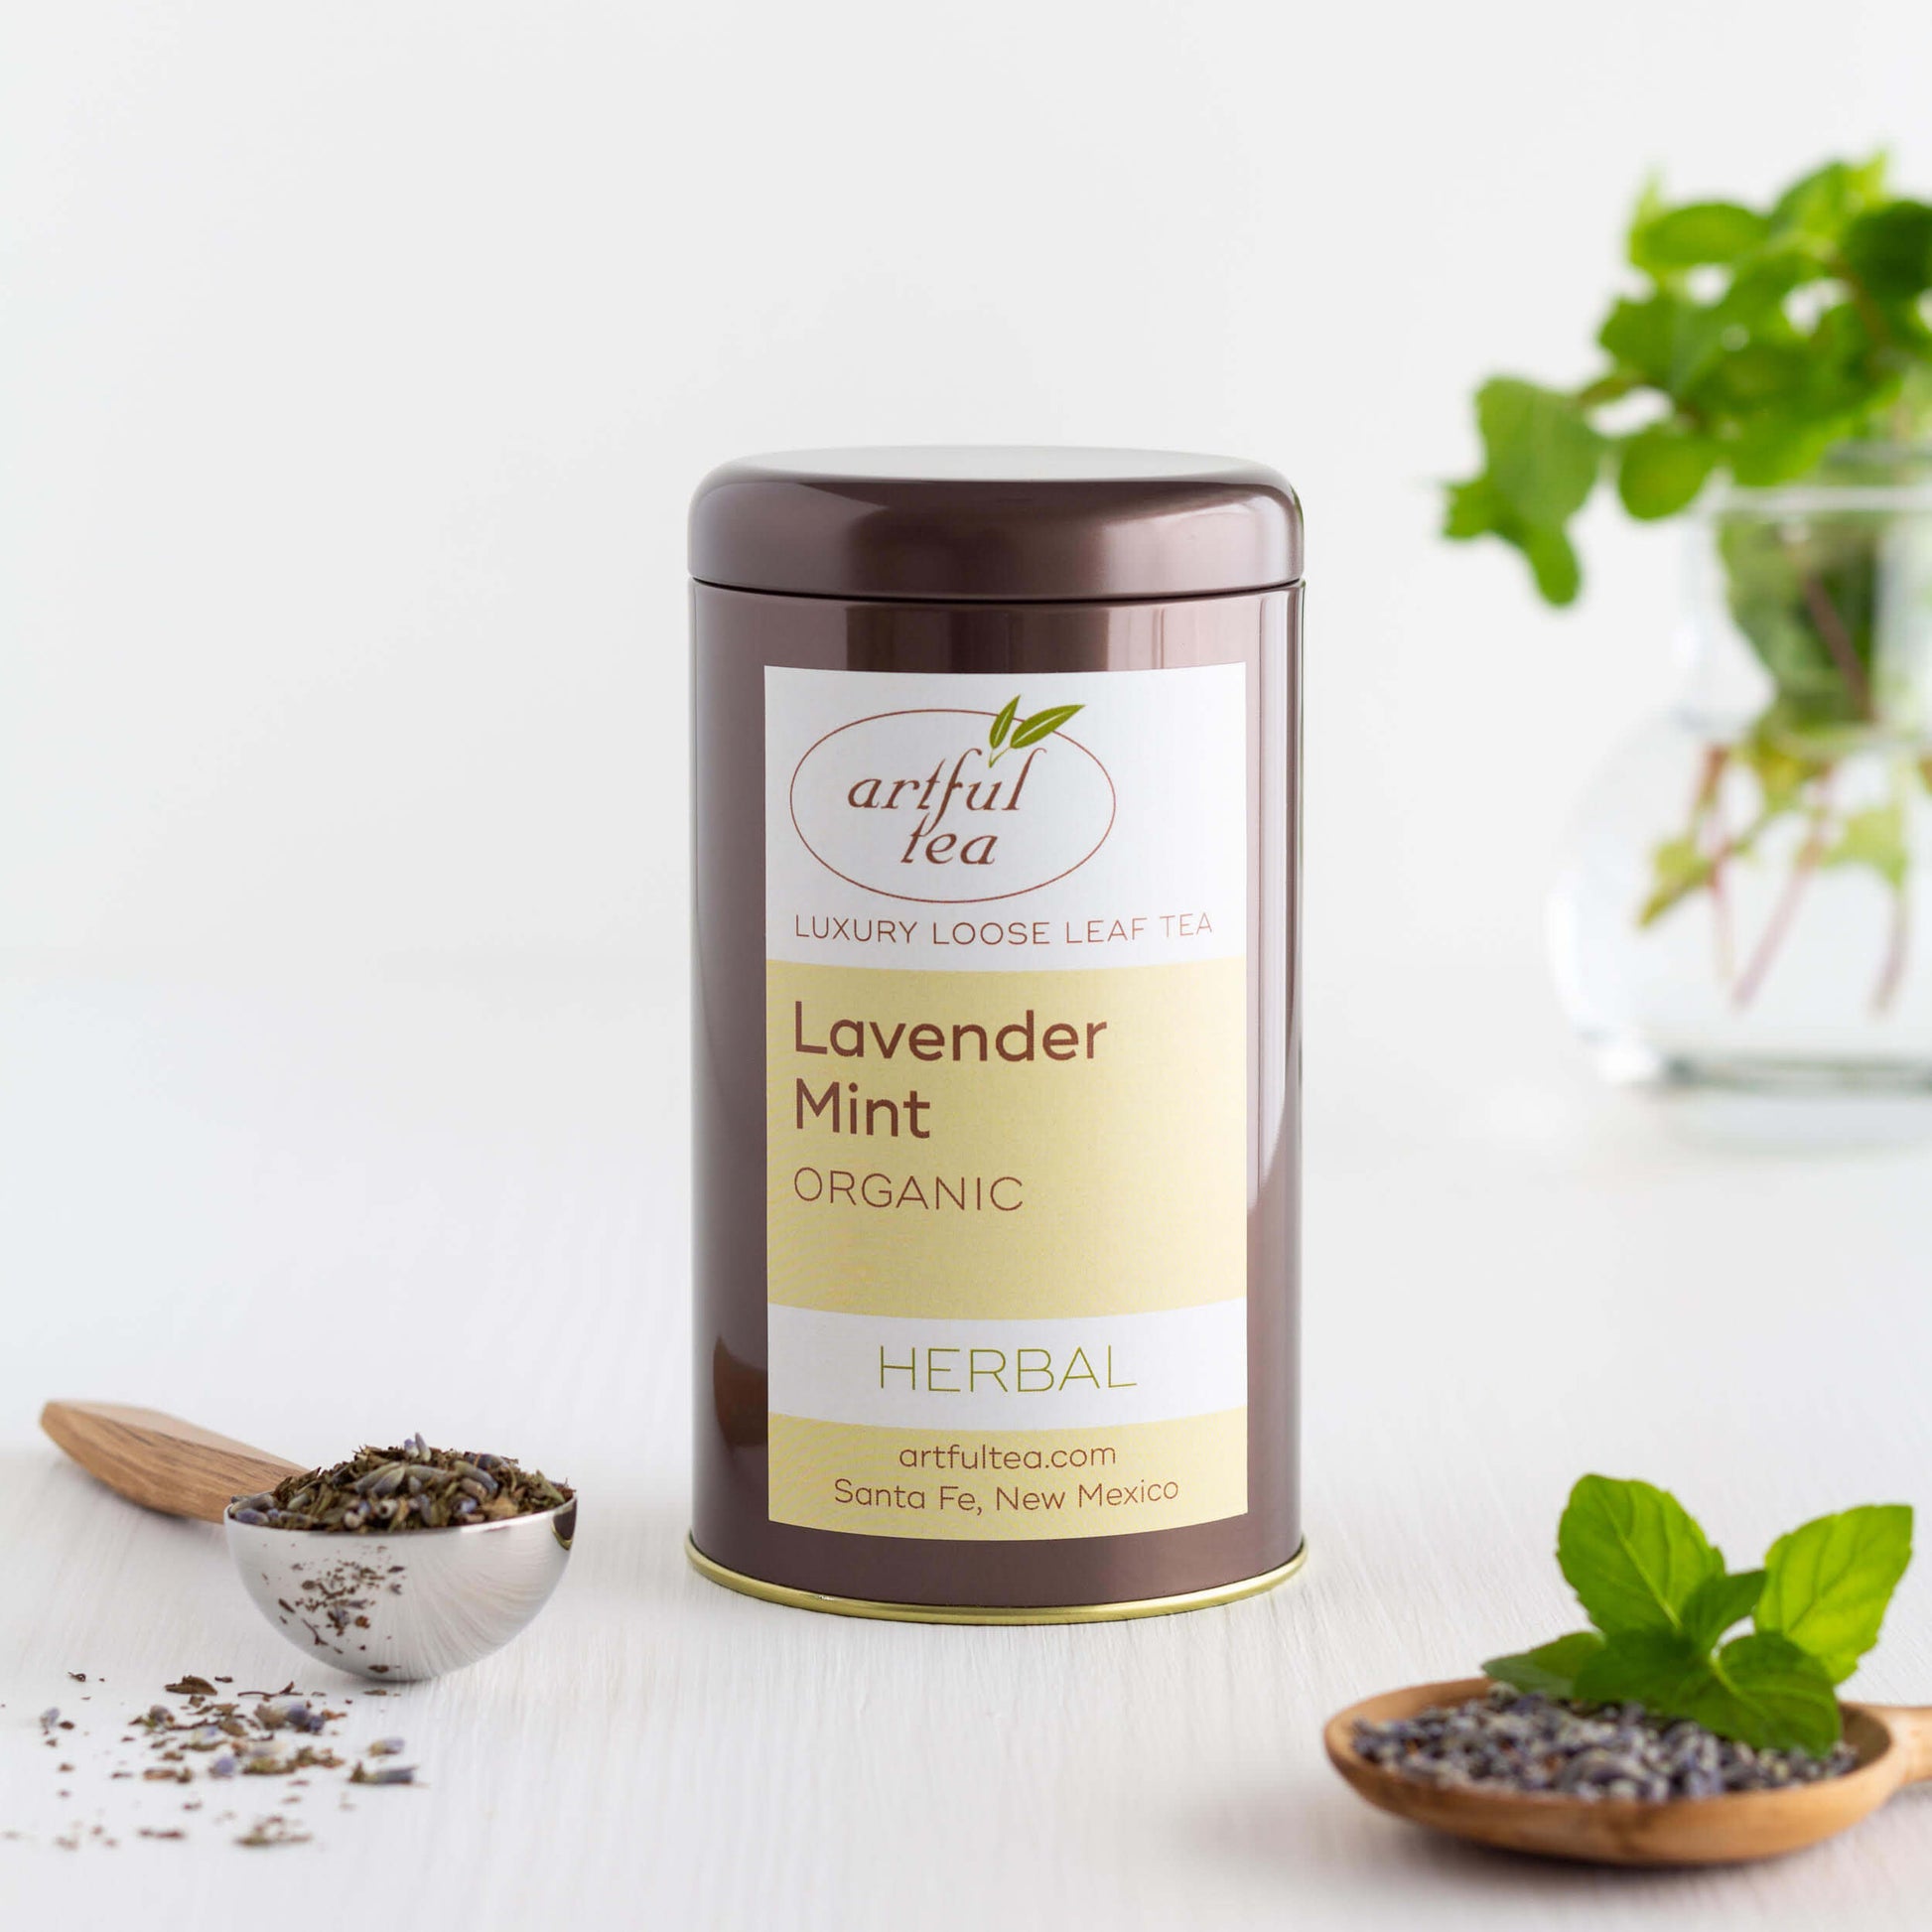 Lavender Mint Organic Herbal Tea shown packaged in a brown tin, with a scoop of loose tea leaves in the foreground and a glass vase with sprigs of mint in the background